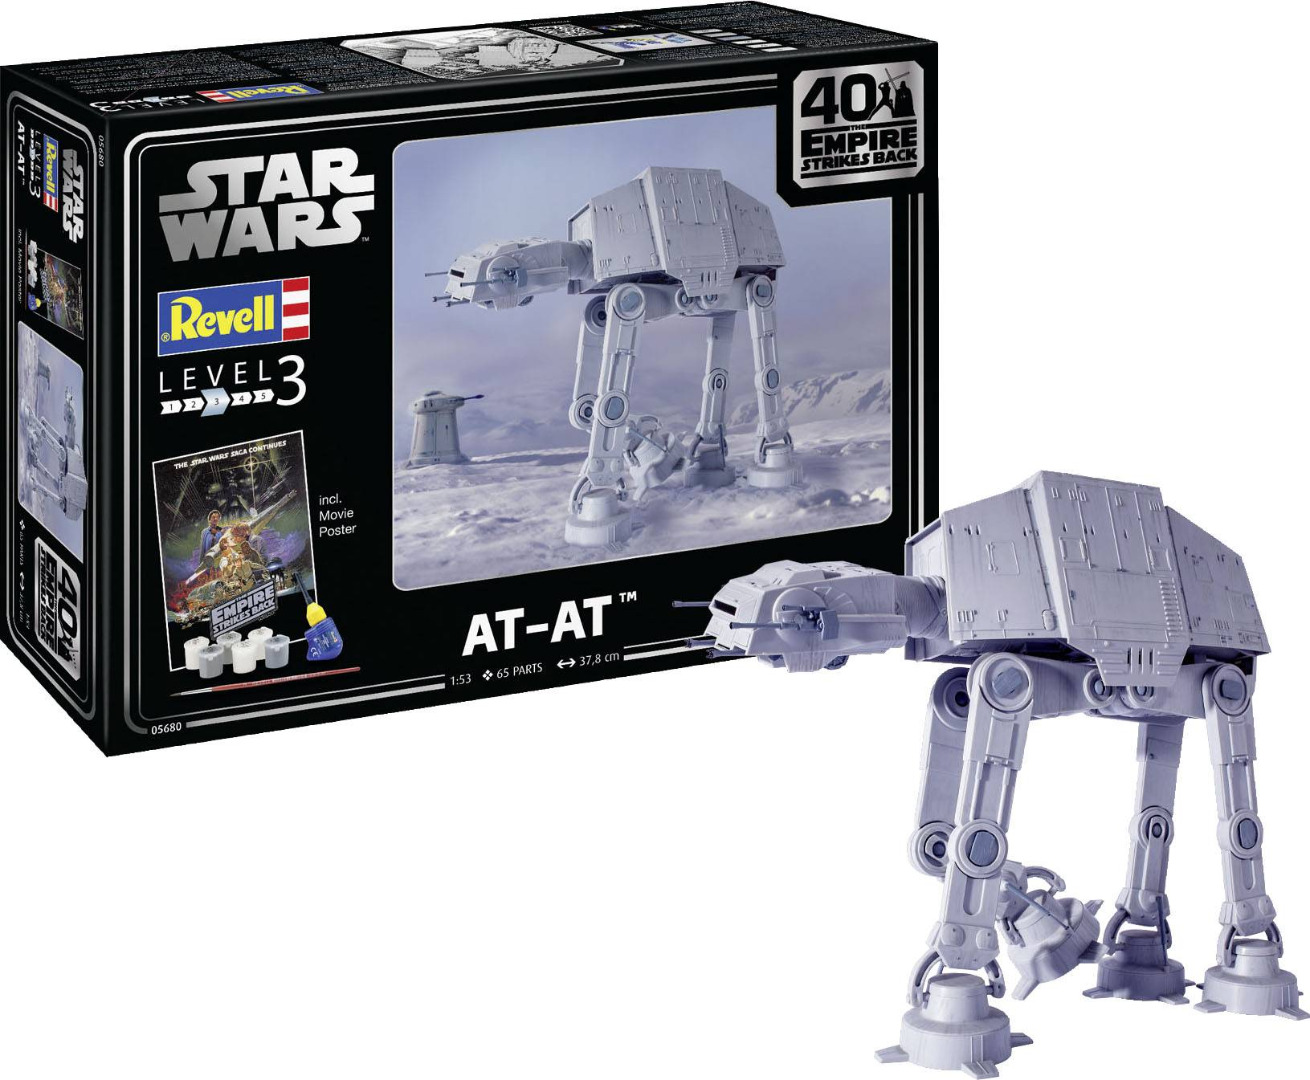 Revell Model Set Star Wars AT-AT 40th Anniversary Scale 1:53